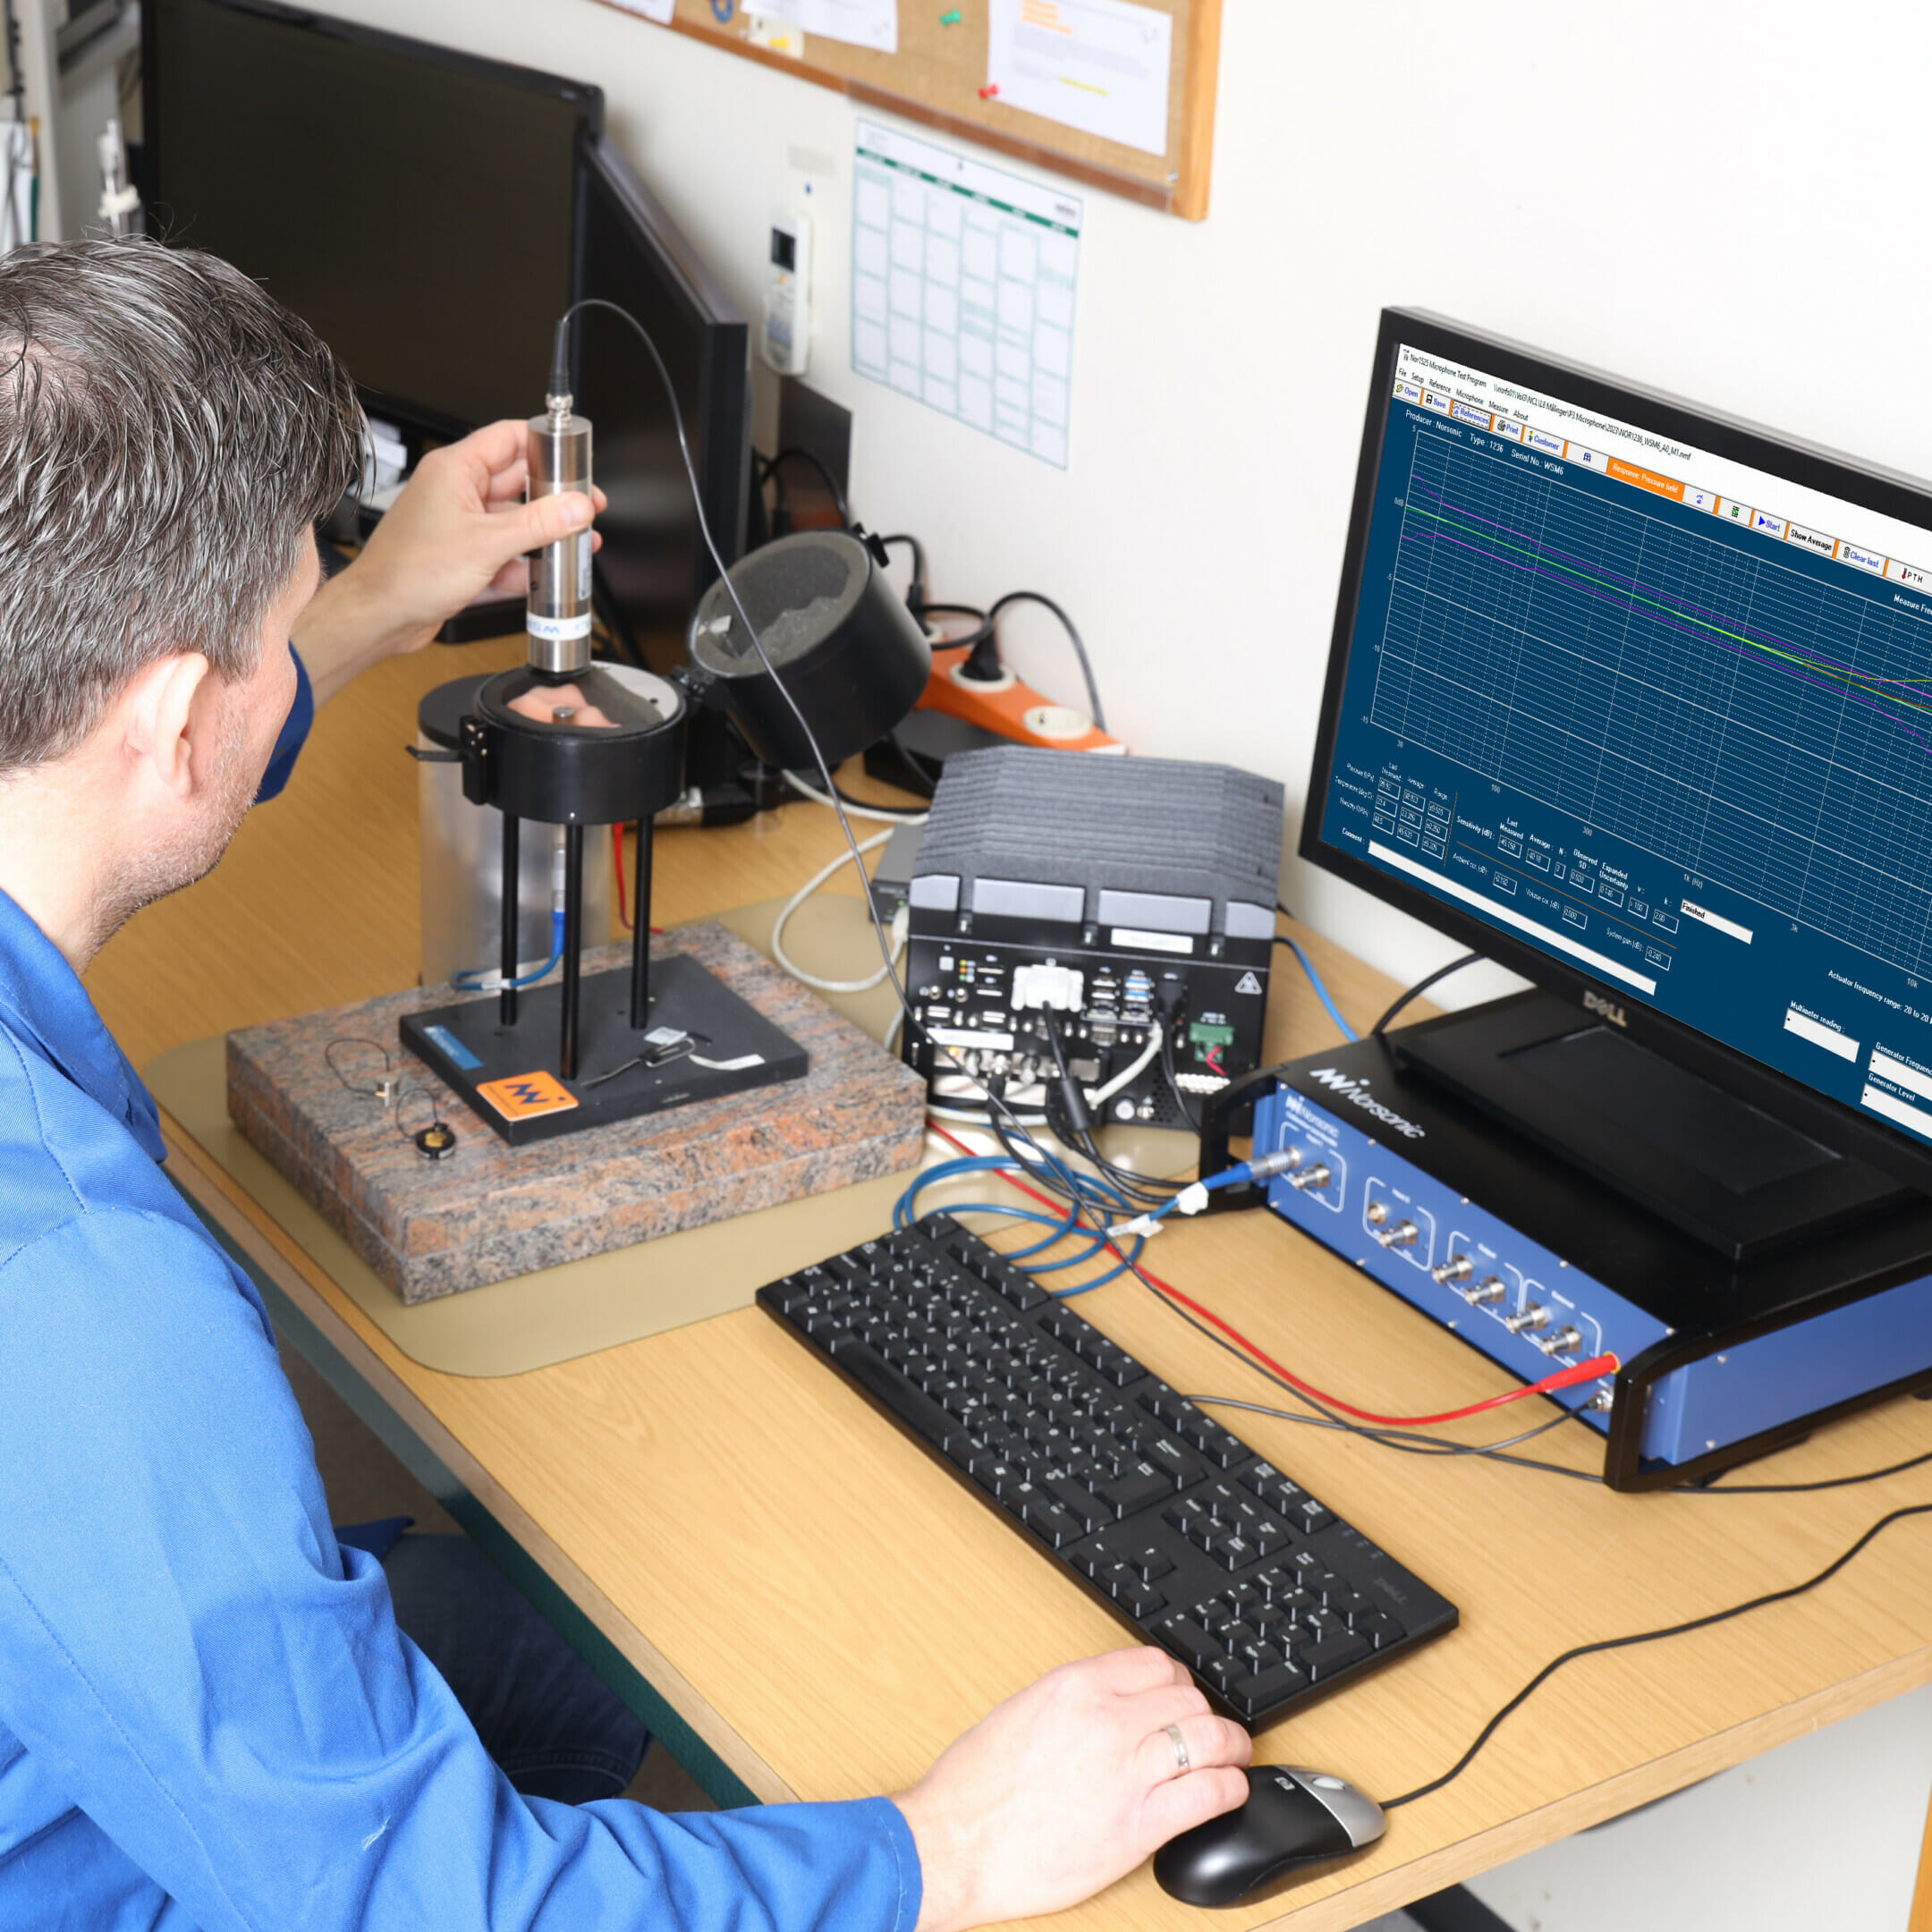 Norsonic Nor1525 calibration system in use